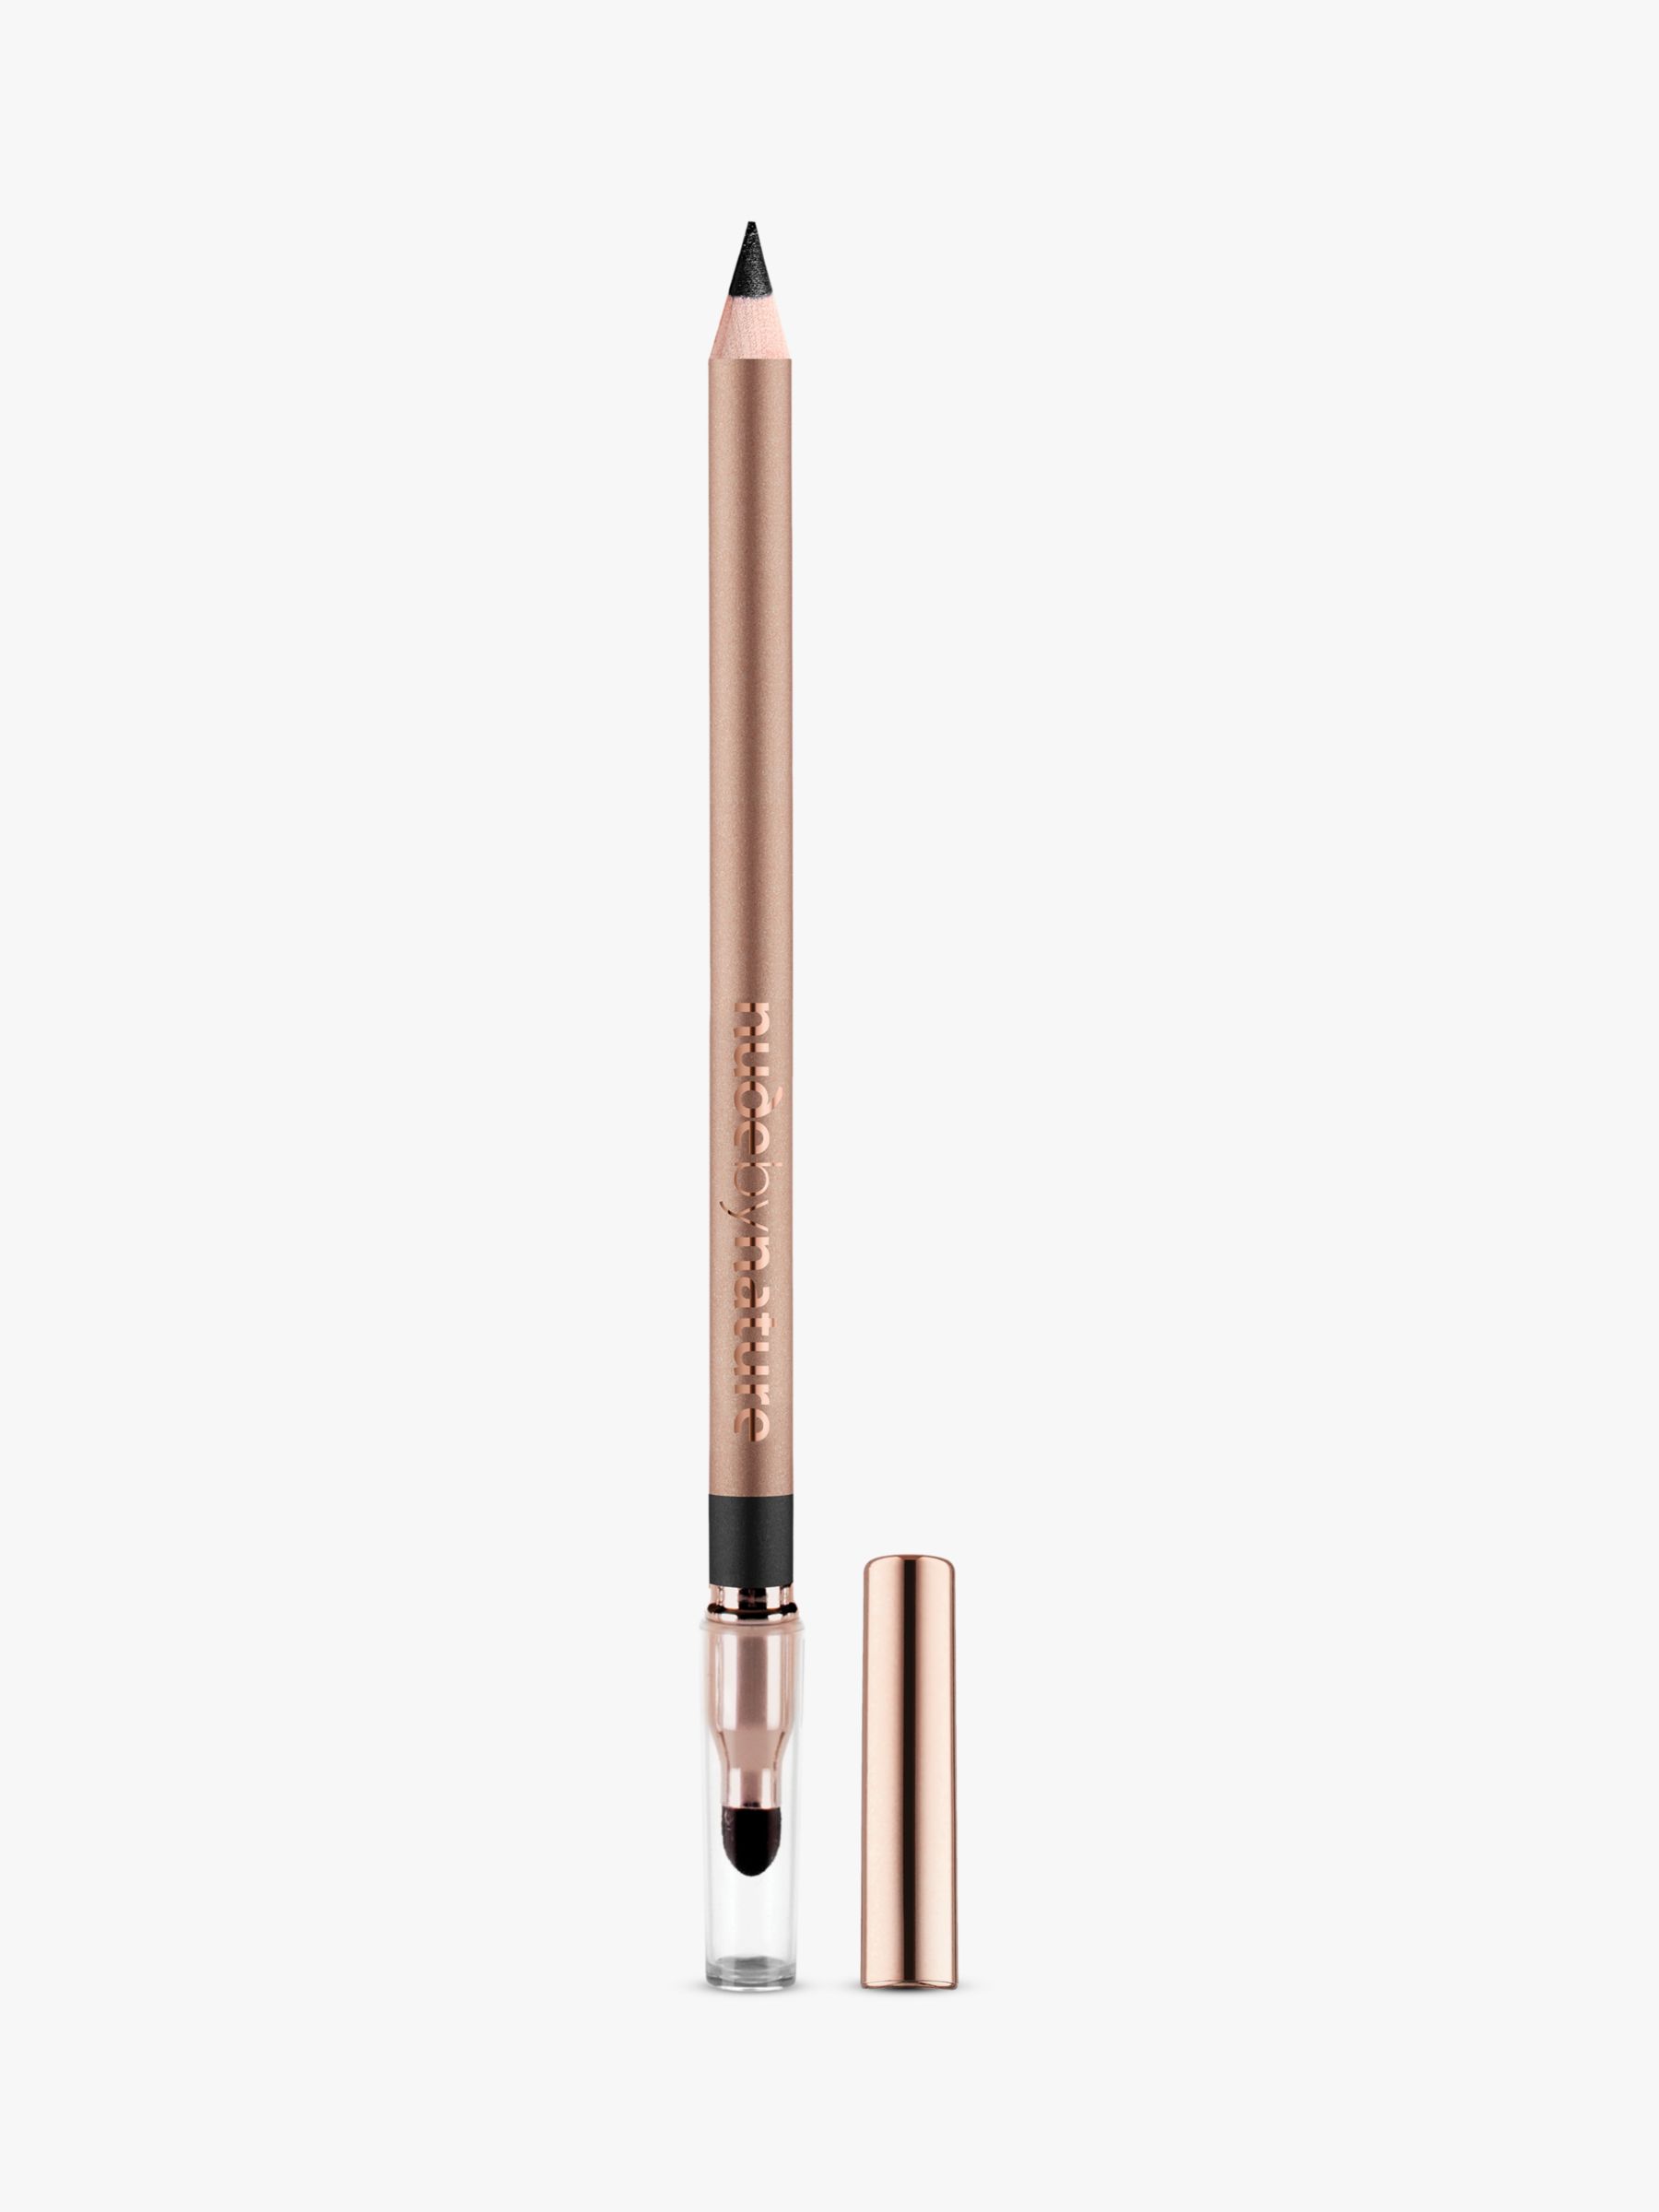 Nude by Nature Contour Eye Pencil